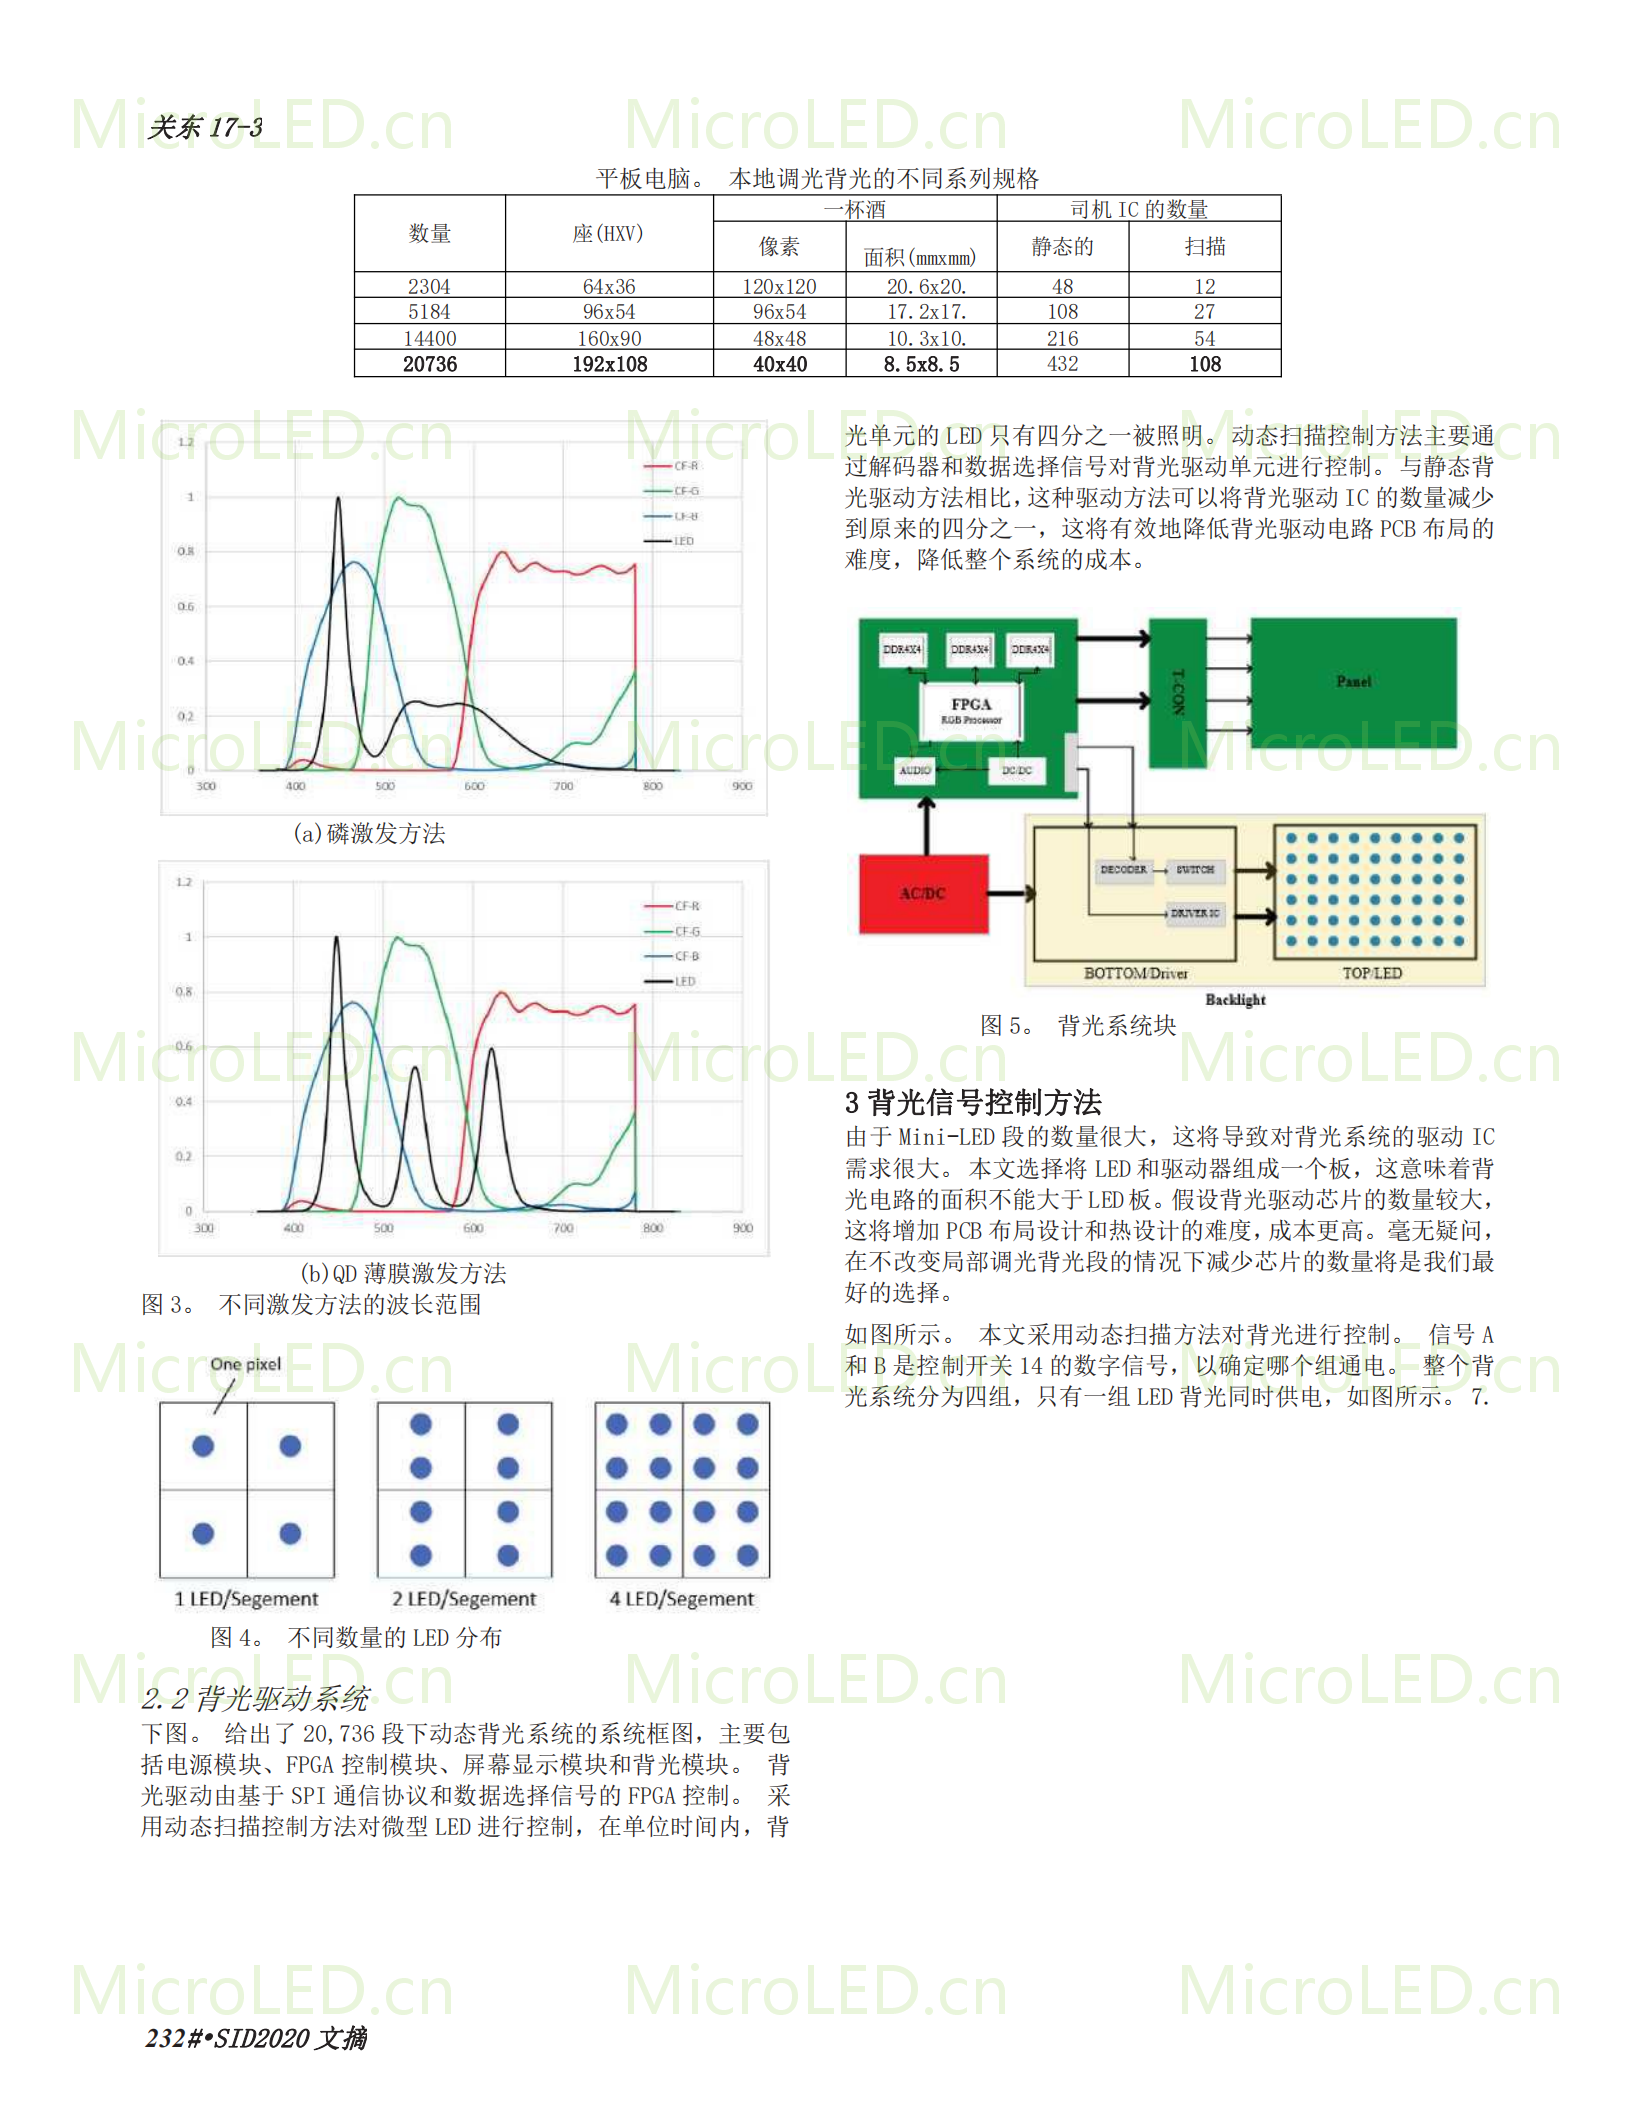 17‐3_ A Novel Pixel‐level Local Dimming Backlight System for HDR Display Based on mini‐LED_1_4_translate_01.png